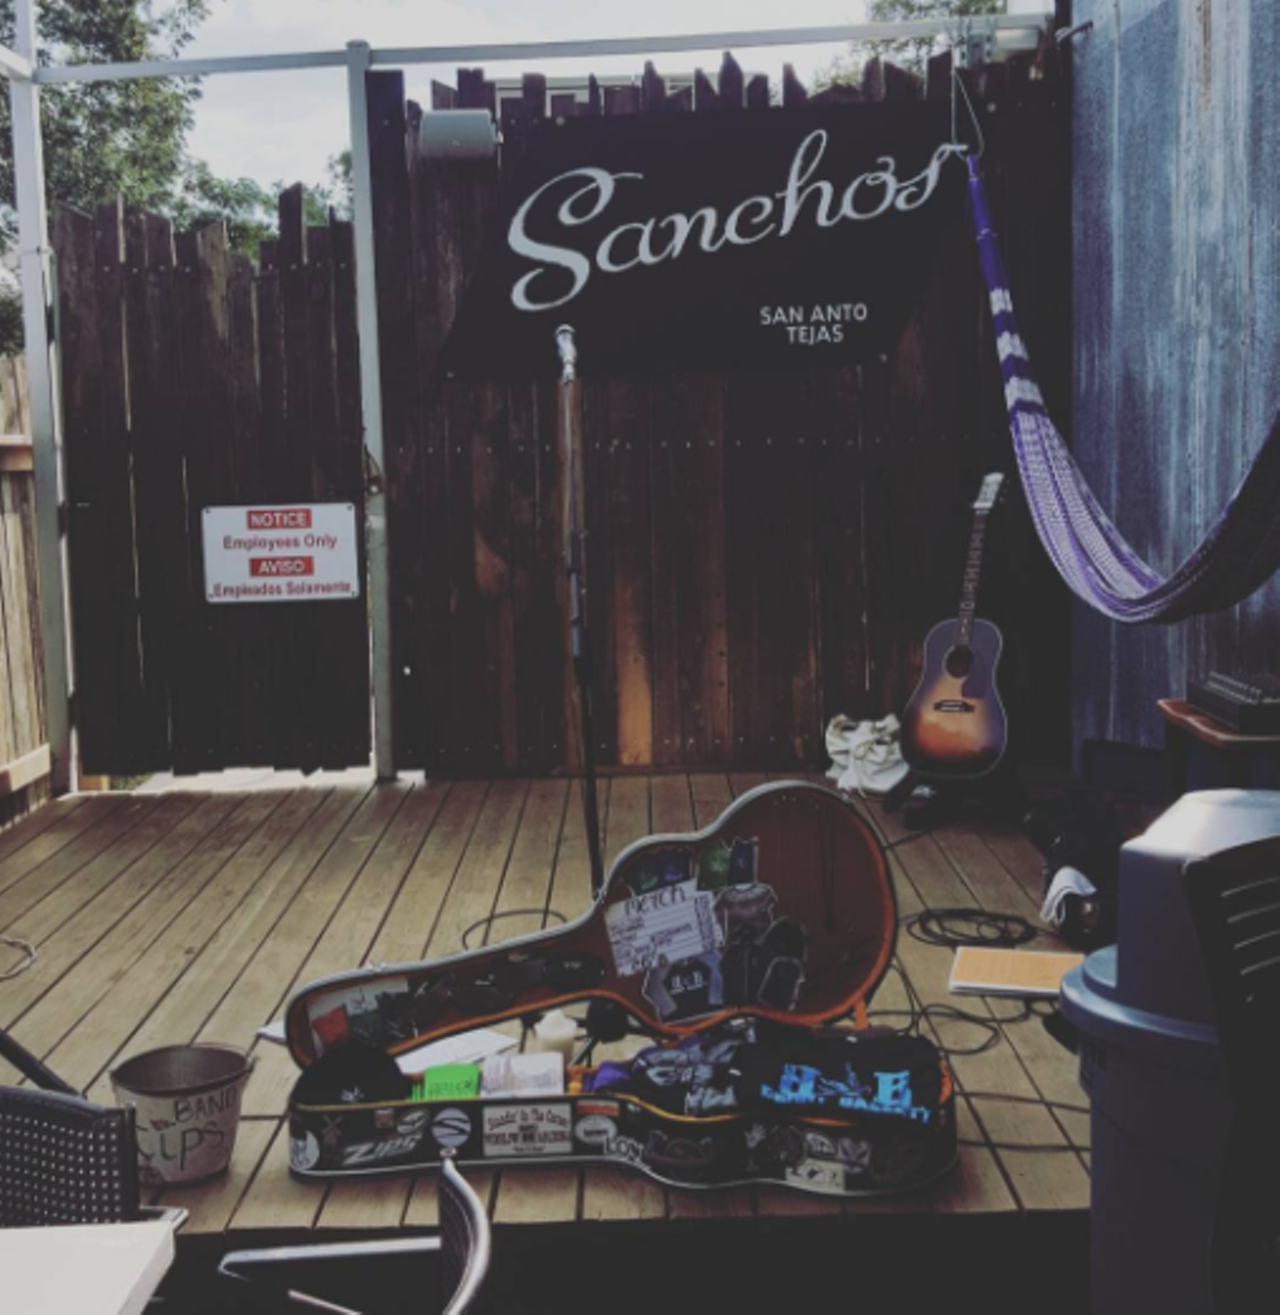 Sanchos Cantina & Cocina
628 Jackson St., (210) 320-1840, sanchosmx.com
Live music on an open patio with a view appreciative of downtown San Antonio ...  what else could you ever need?
Photo via Instagram, benny_bassett